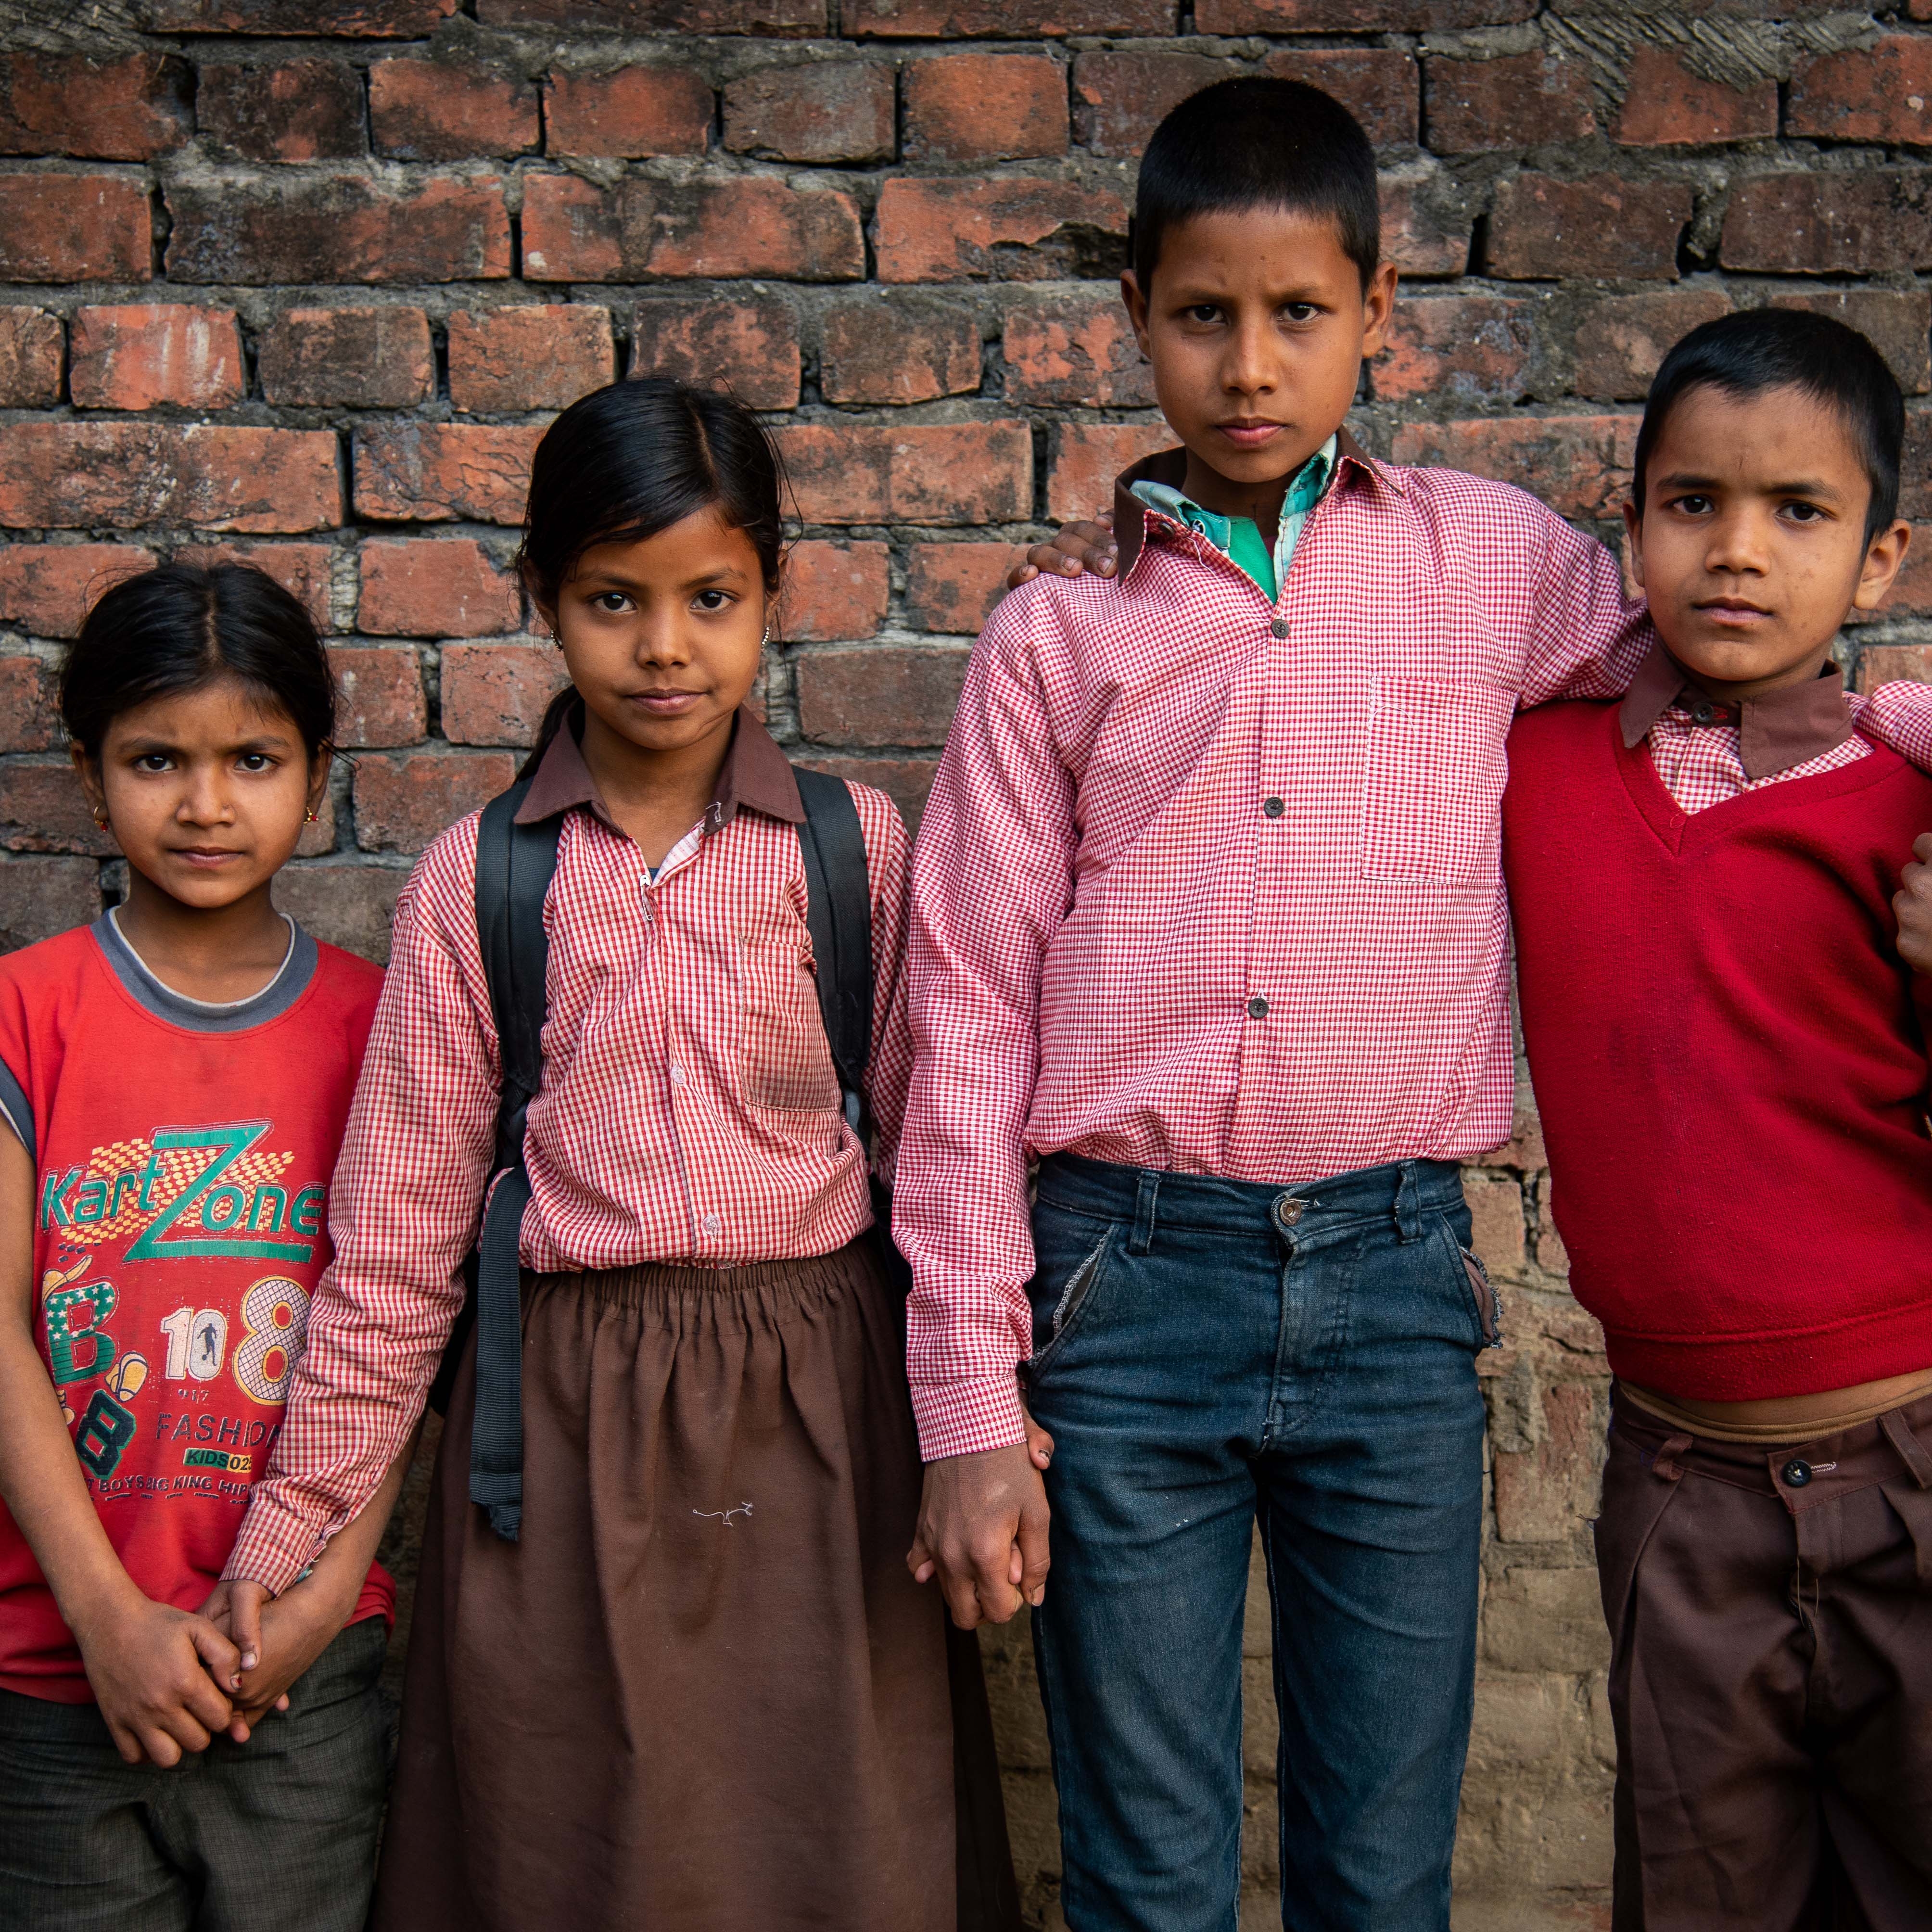 A group of four children stand together against a brick wall in India.